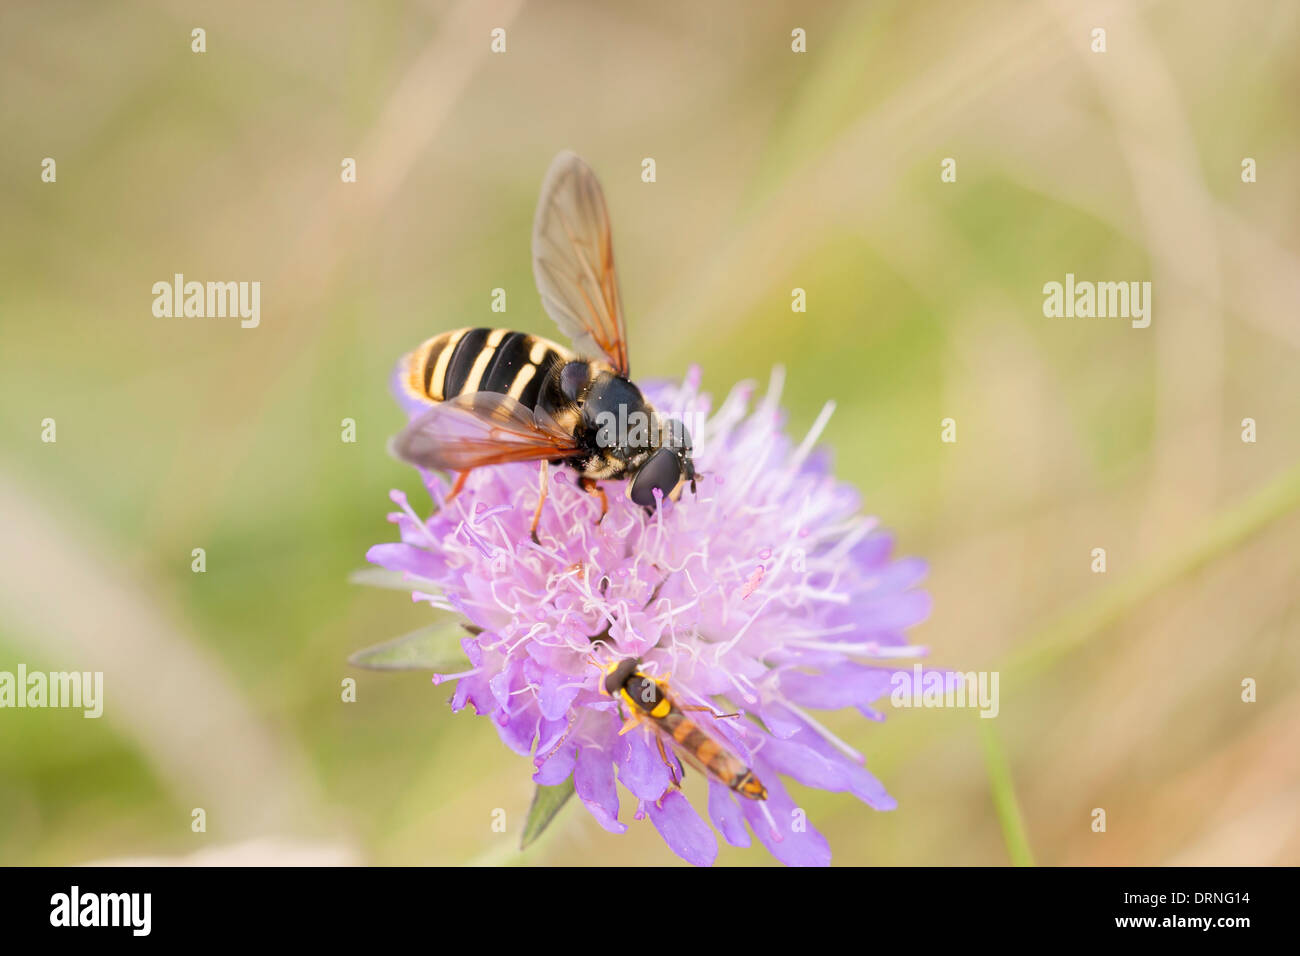 Little wasp on violet flower collecting honey Stock Photo